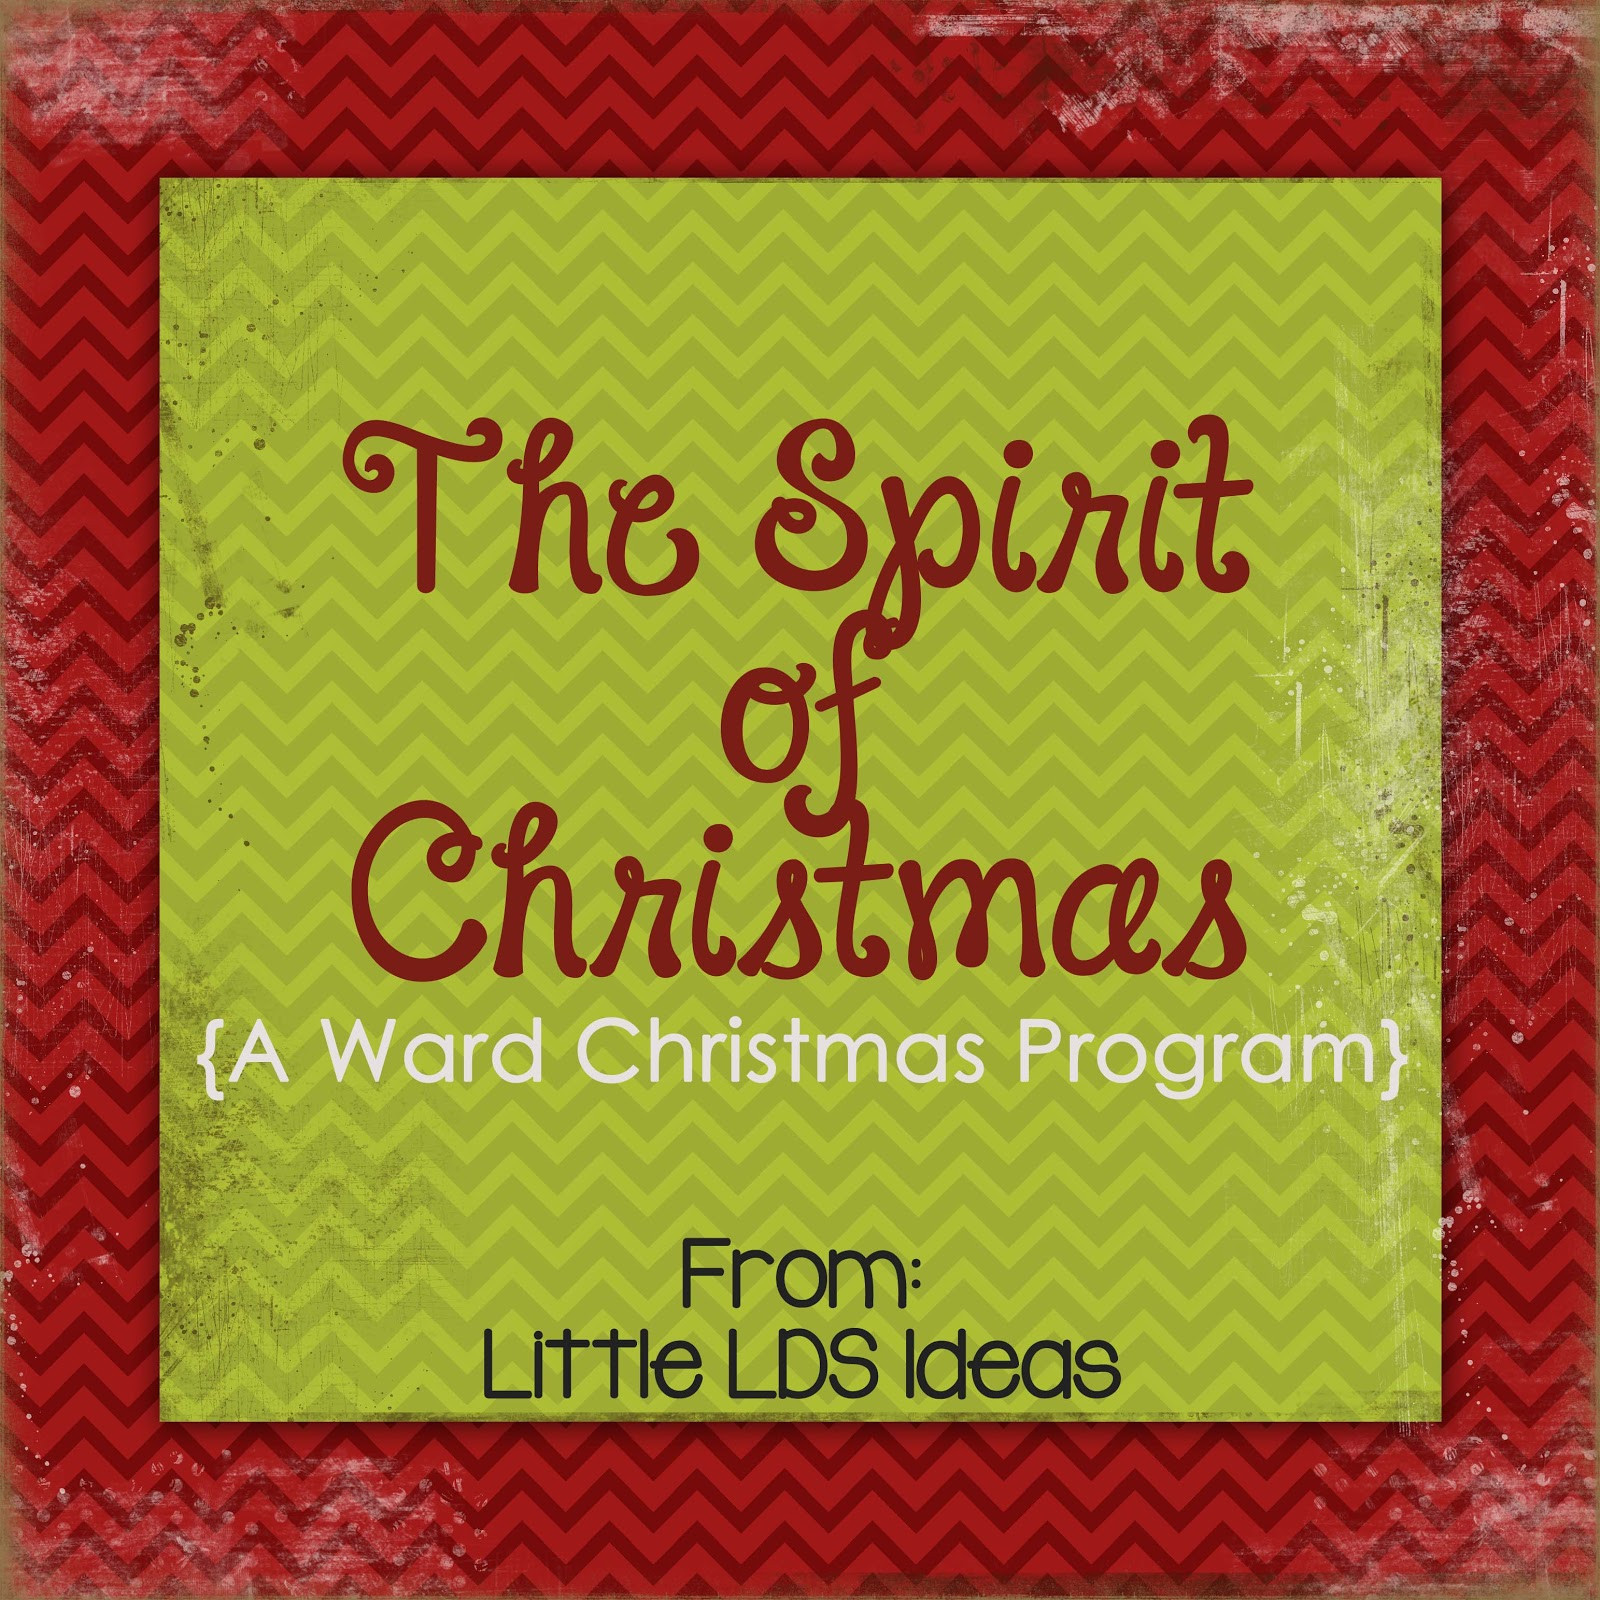 Lds Christmas Party Ideas
 Download Lds Christmas Programs free